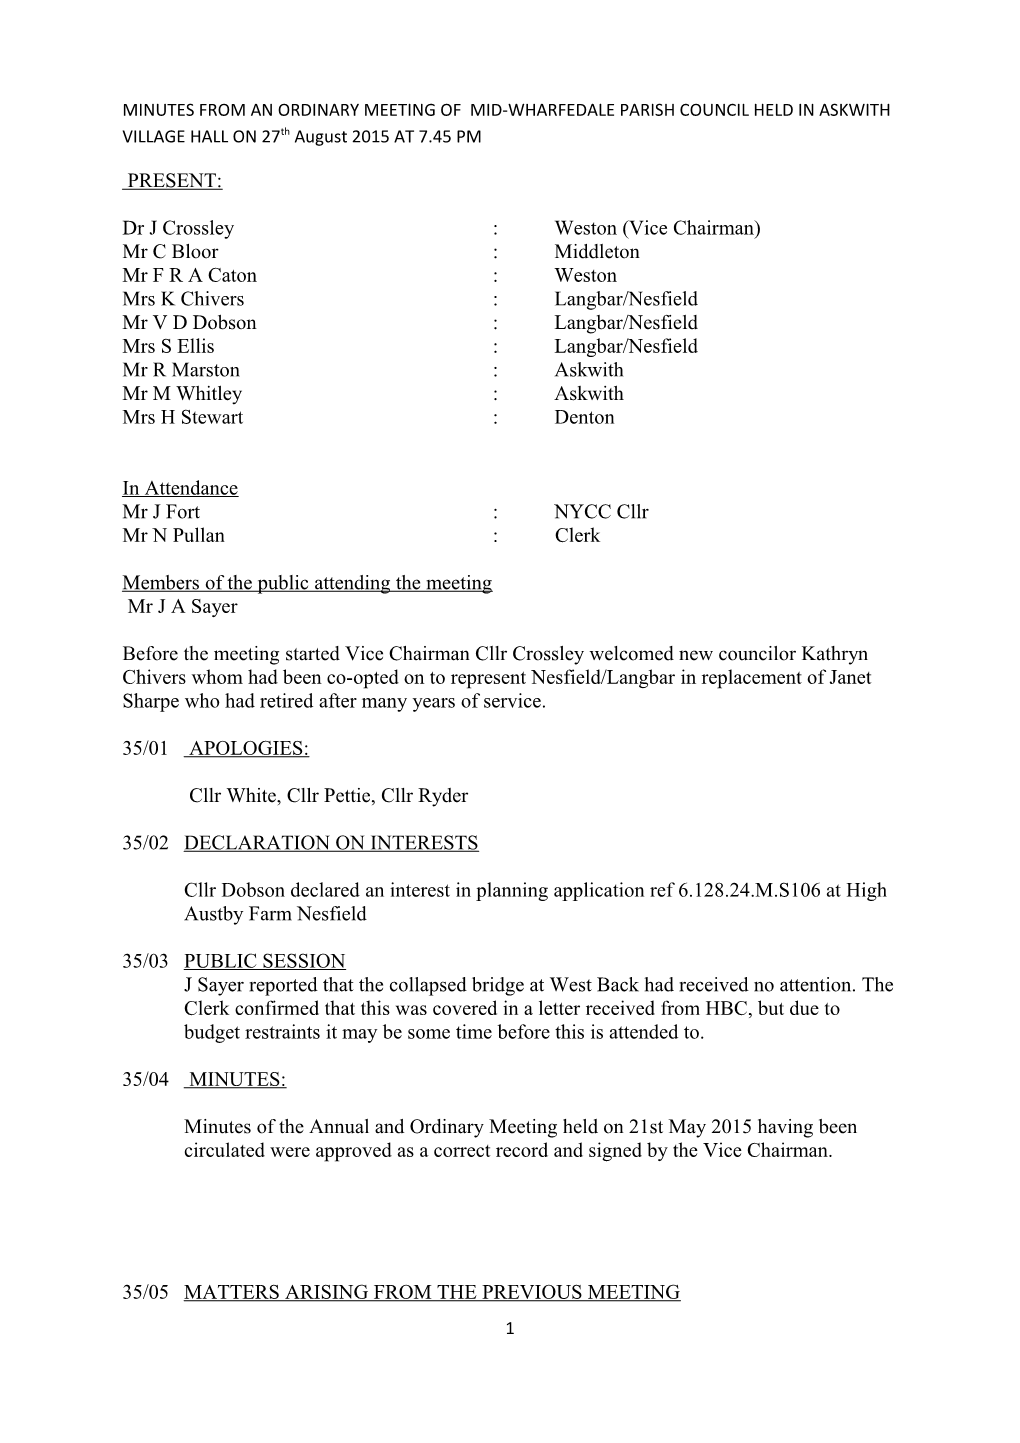 Minutes from the Meeting of the Mid-Wharfedale Parish Council